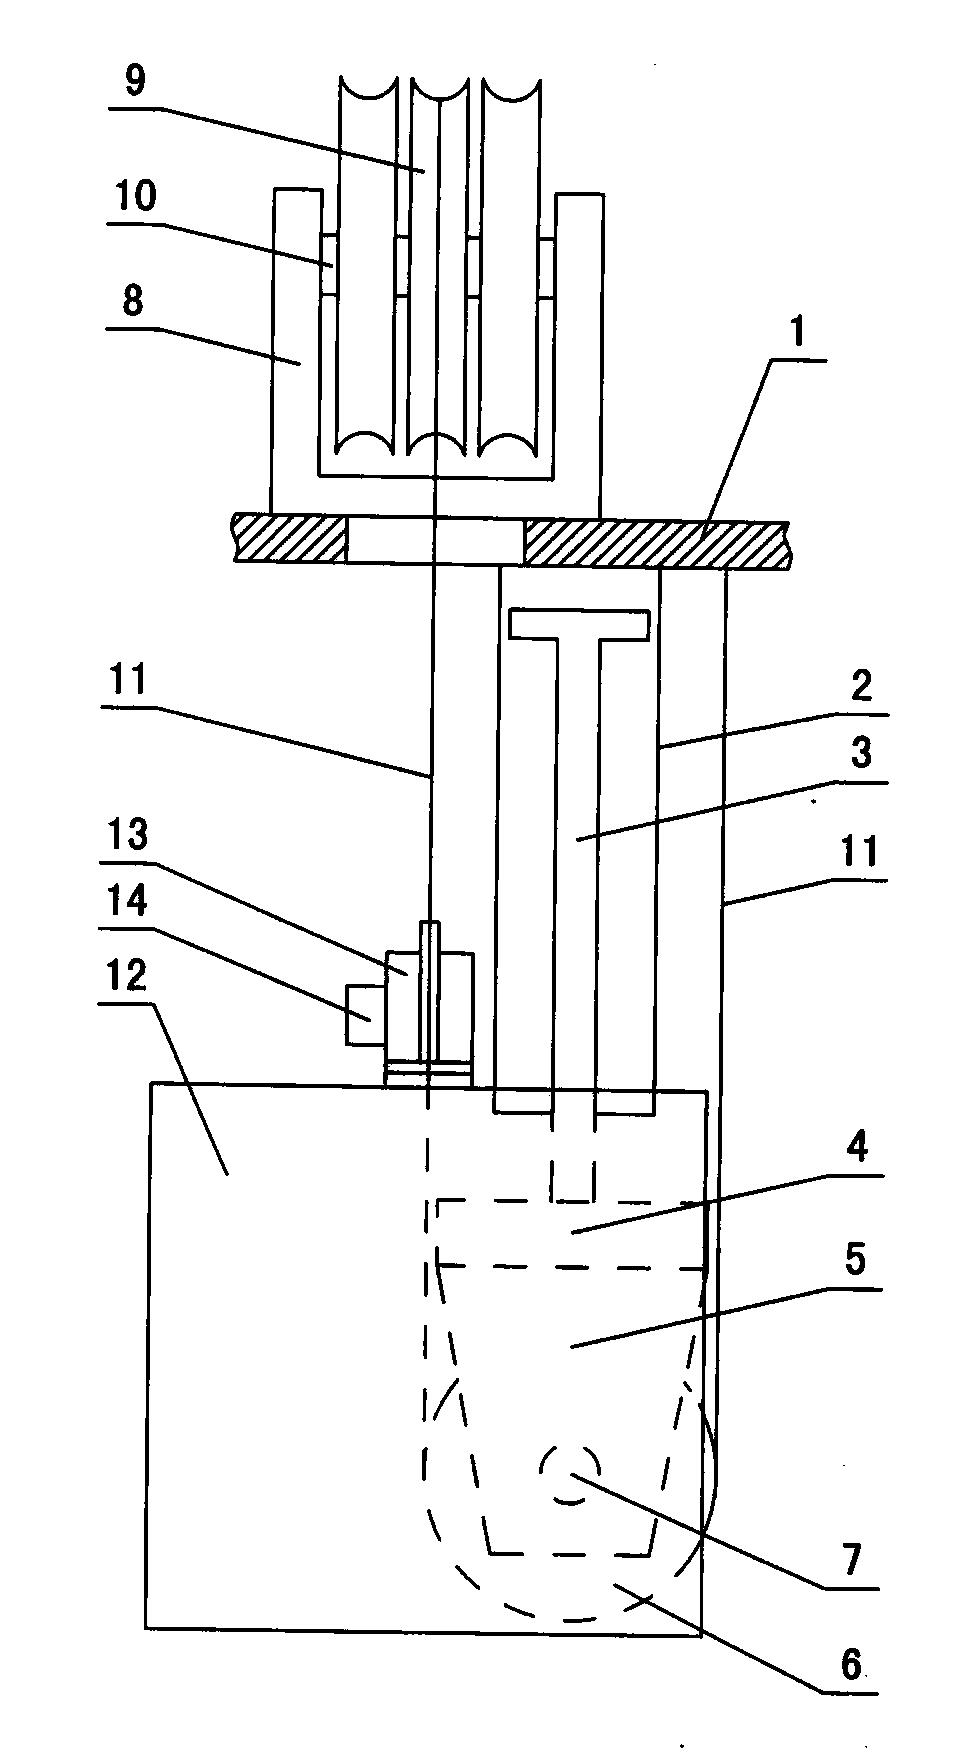 Hang-upside-down type laterally-arranged hydraulic goods lift